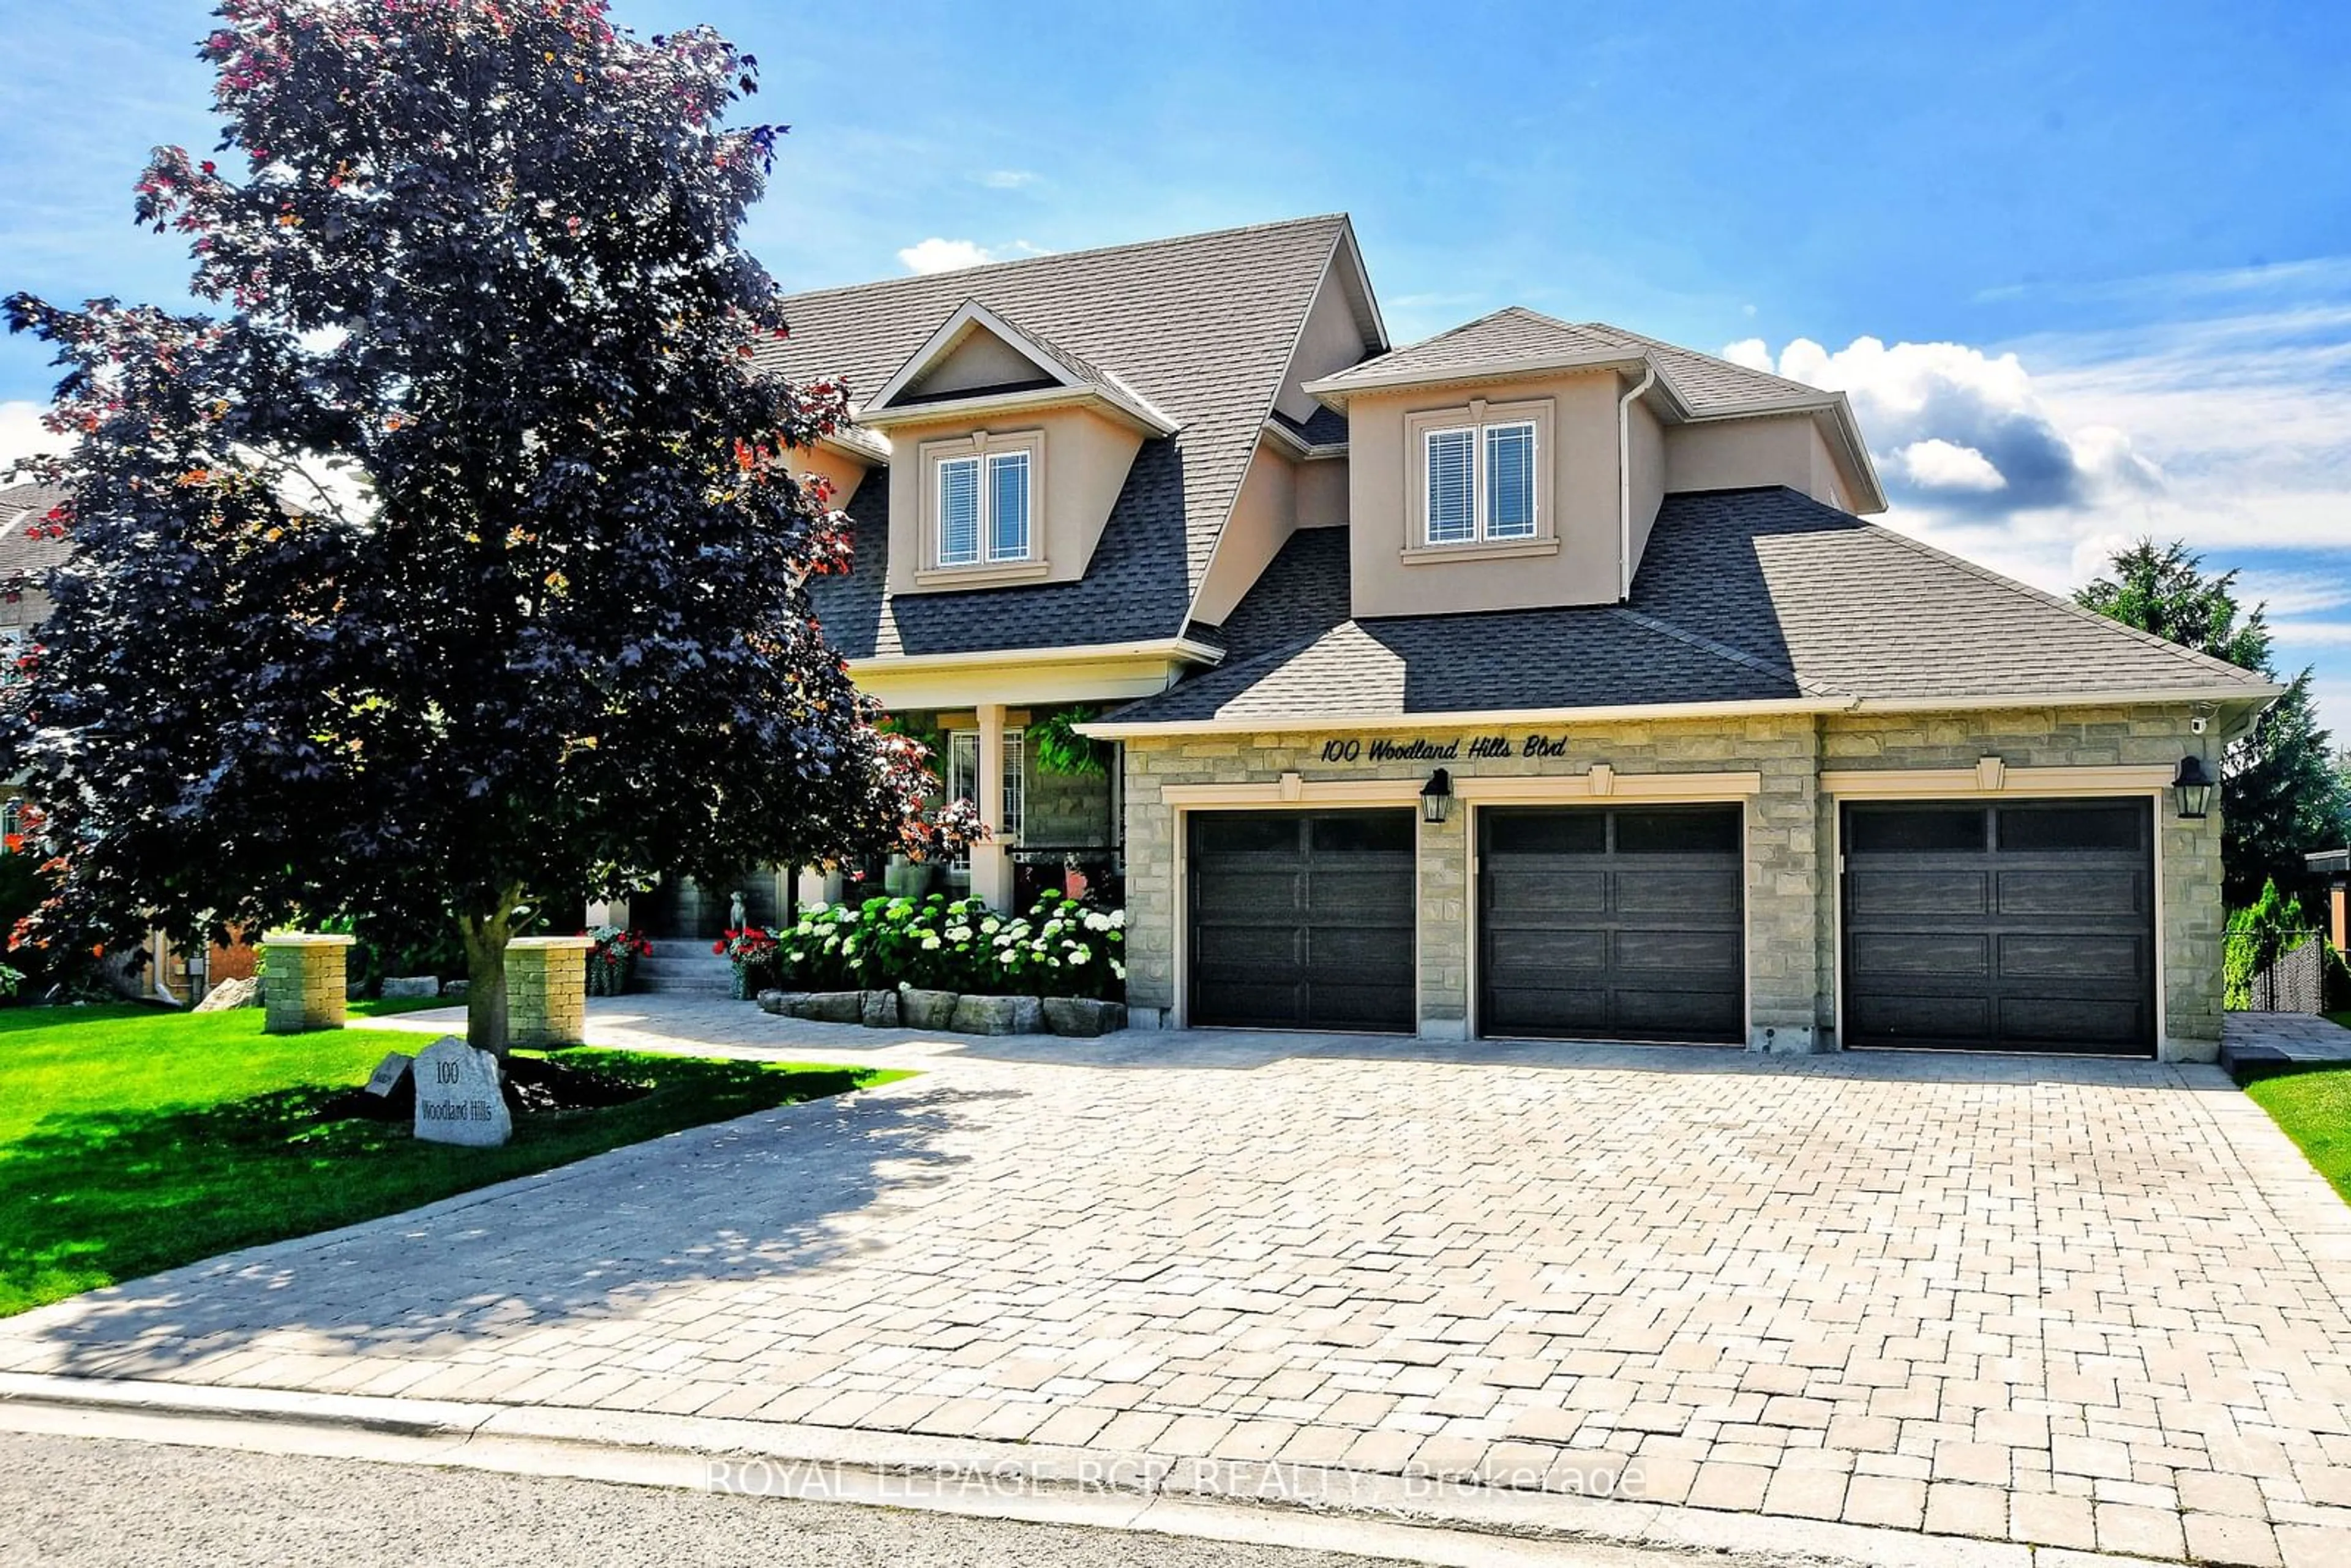 Home with brick exterior material for 100 Woodland Hills Blvd, Aurora Ontario L4G 7T5